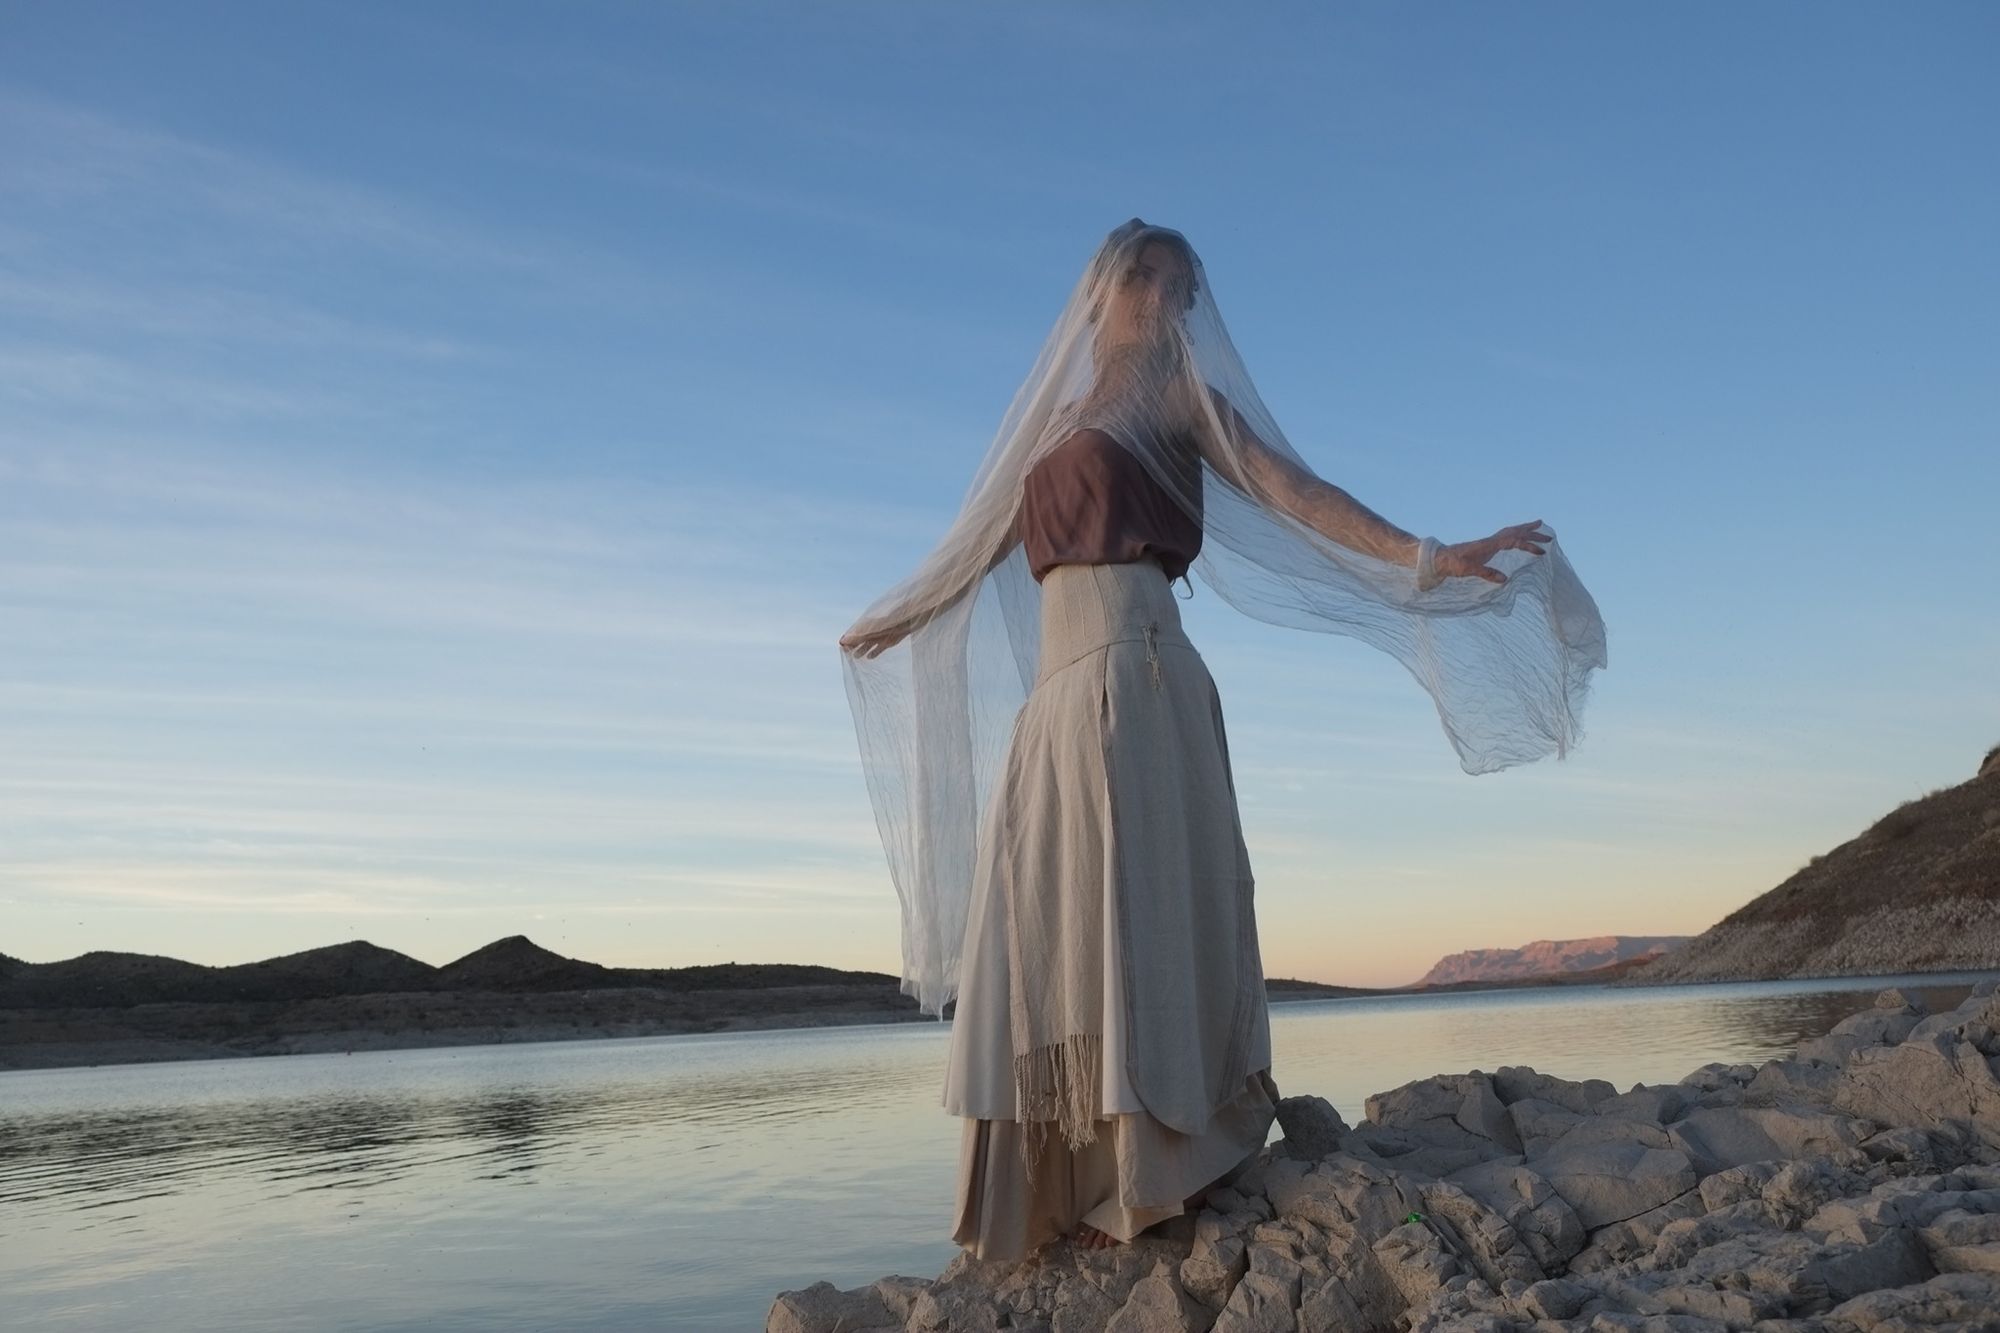 woman wearing white wedding skirt and lilac shirt by a still lake at sunset